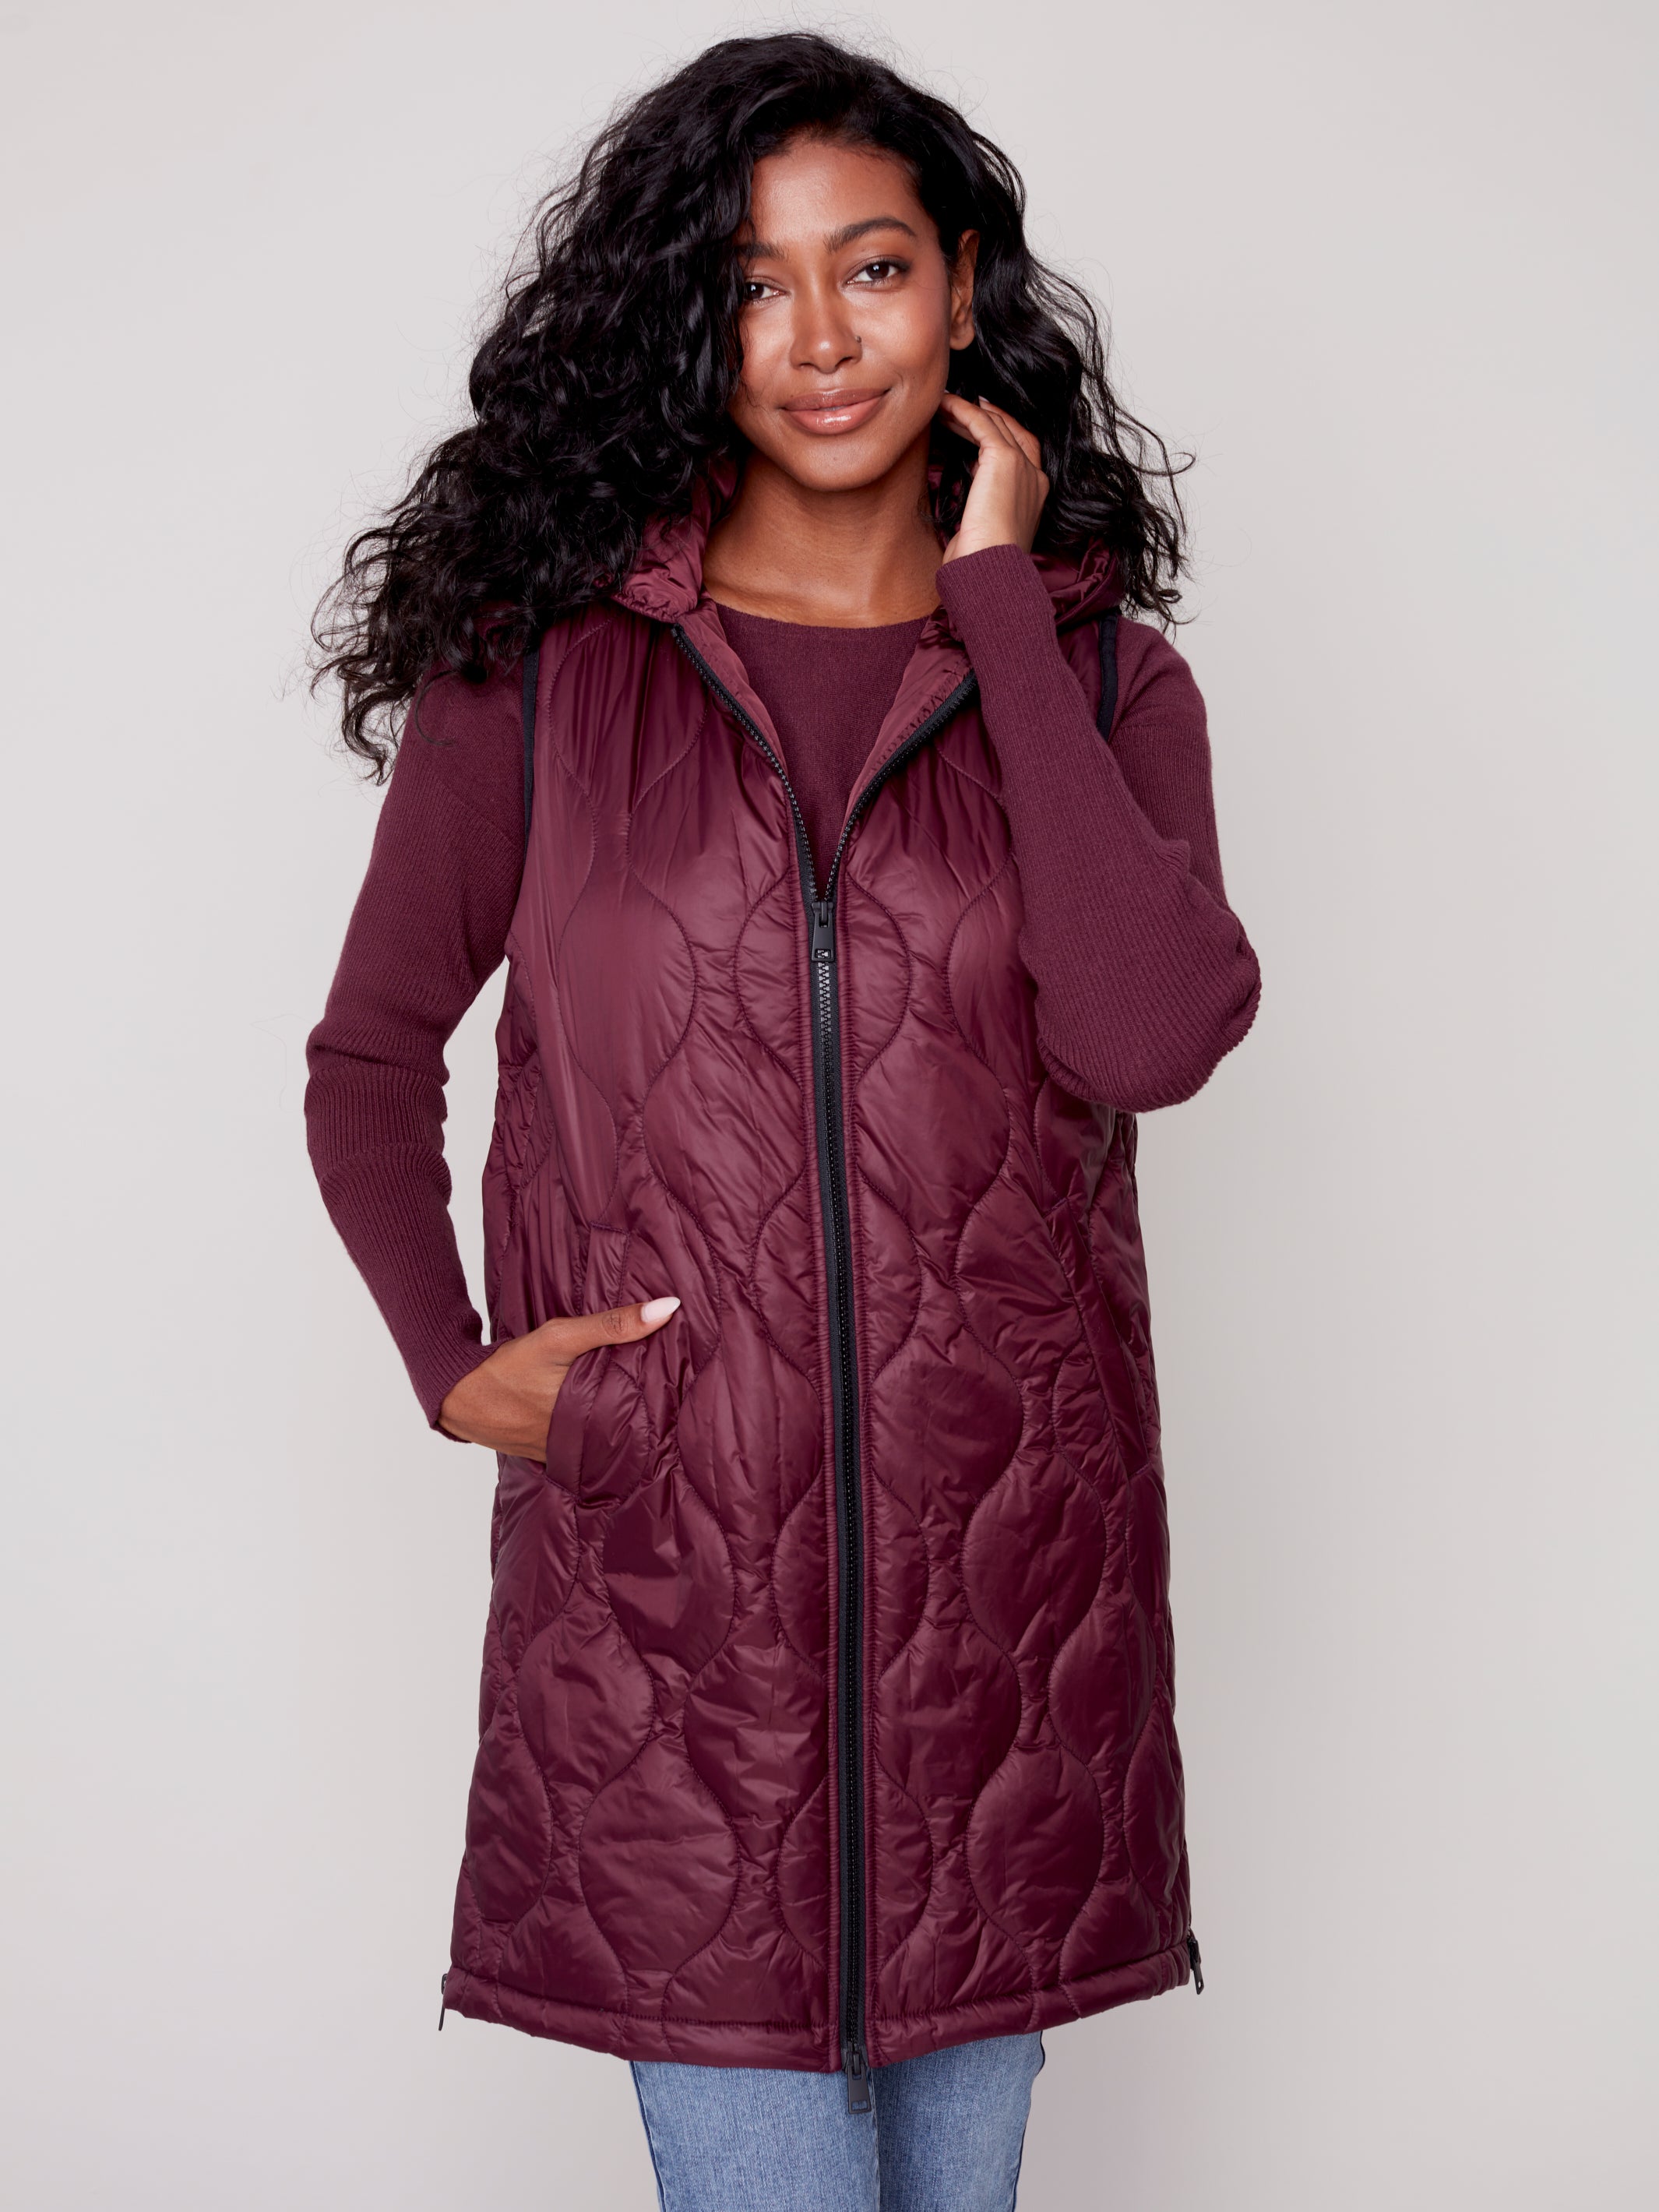 Hooded Long Sleeve Quilted Vest C6268/388B 510